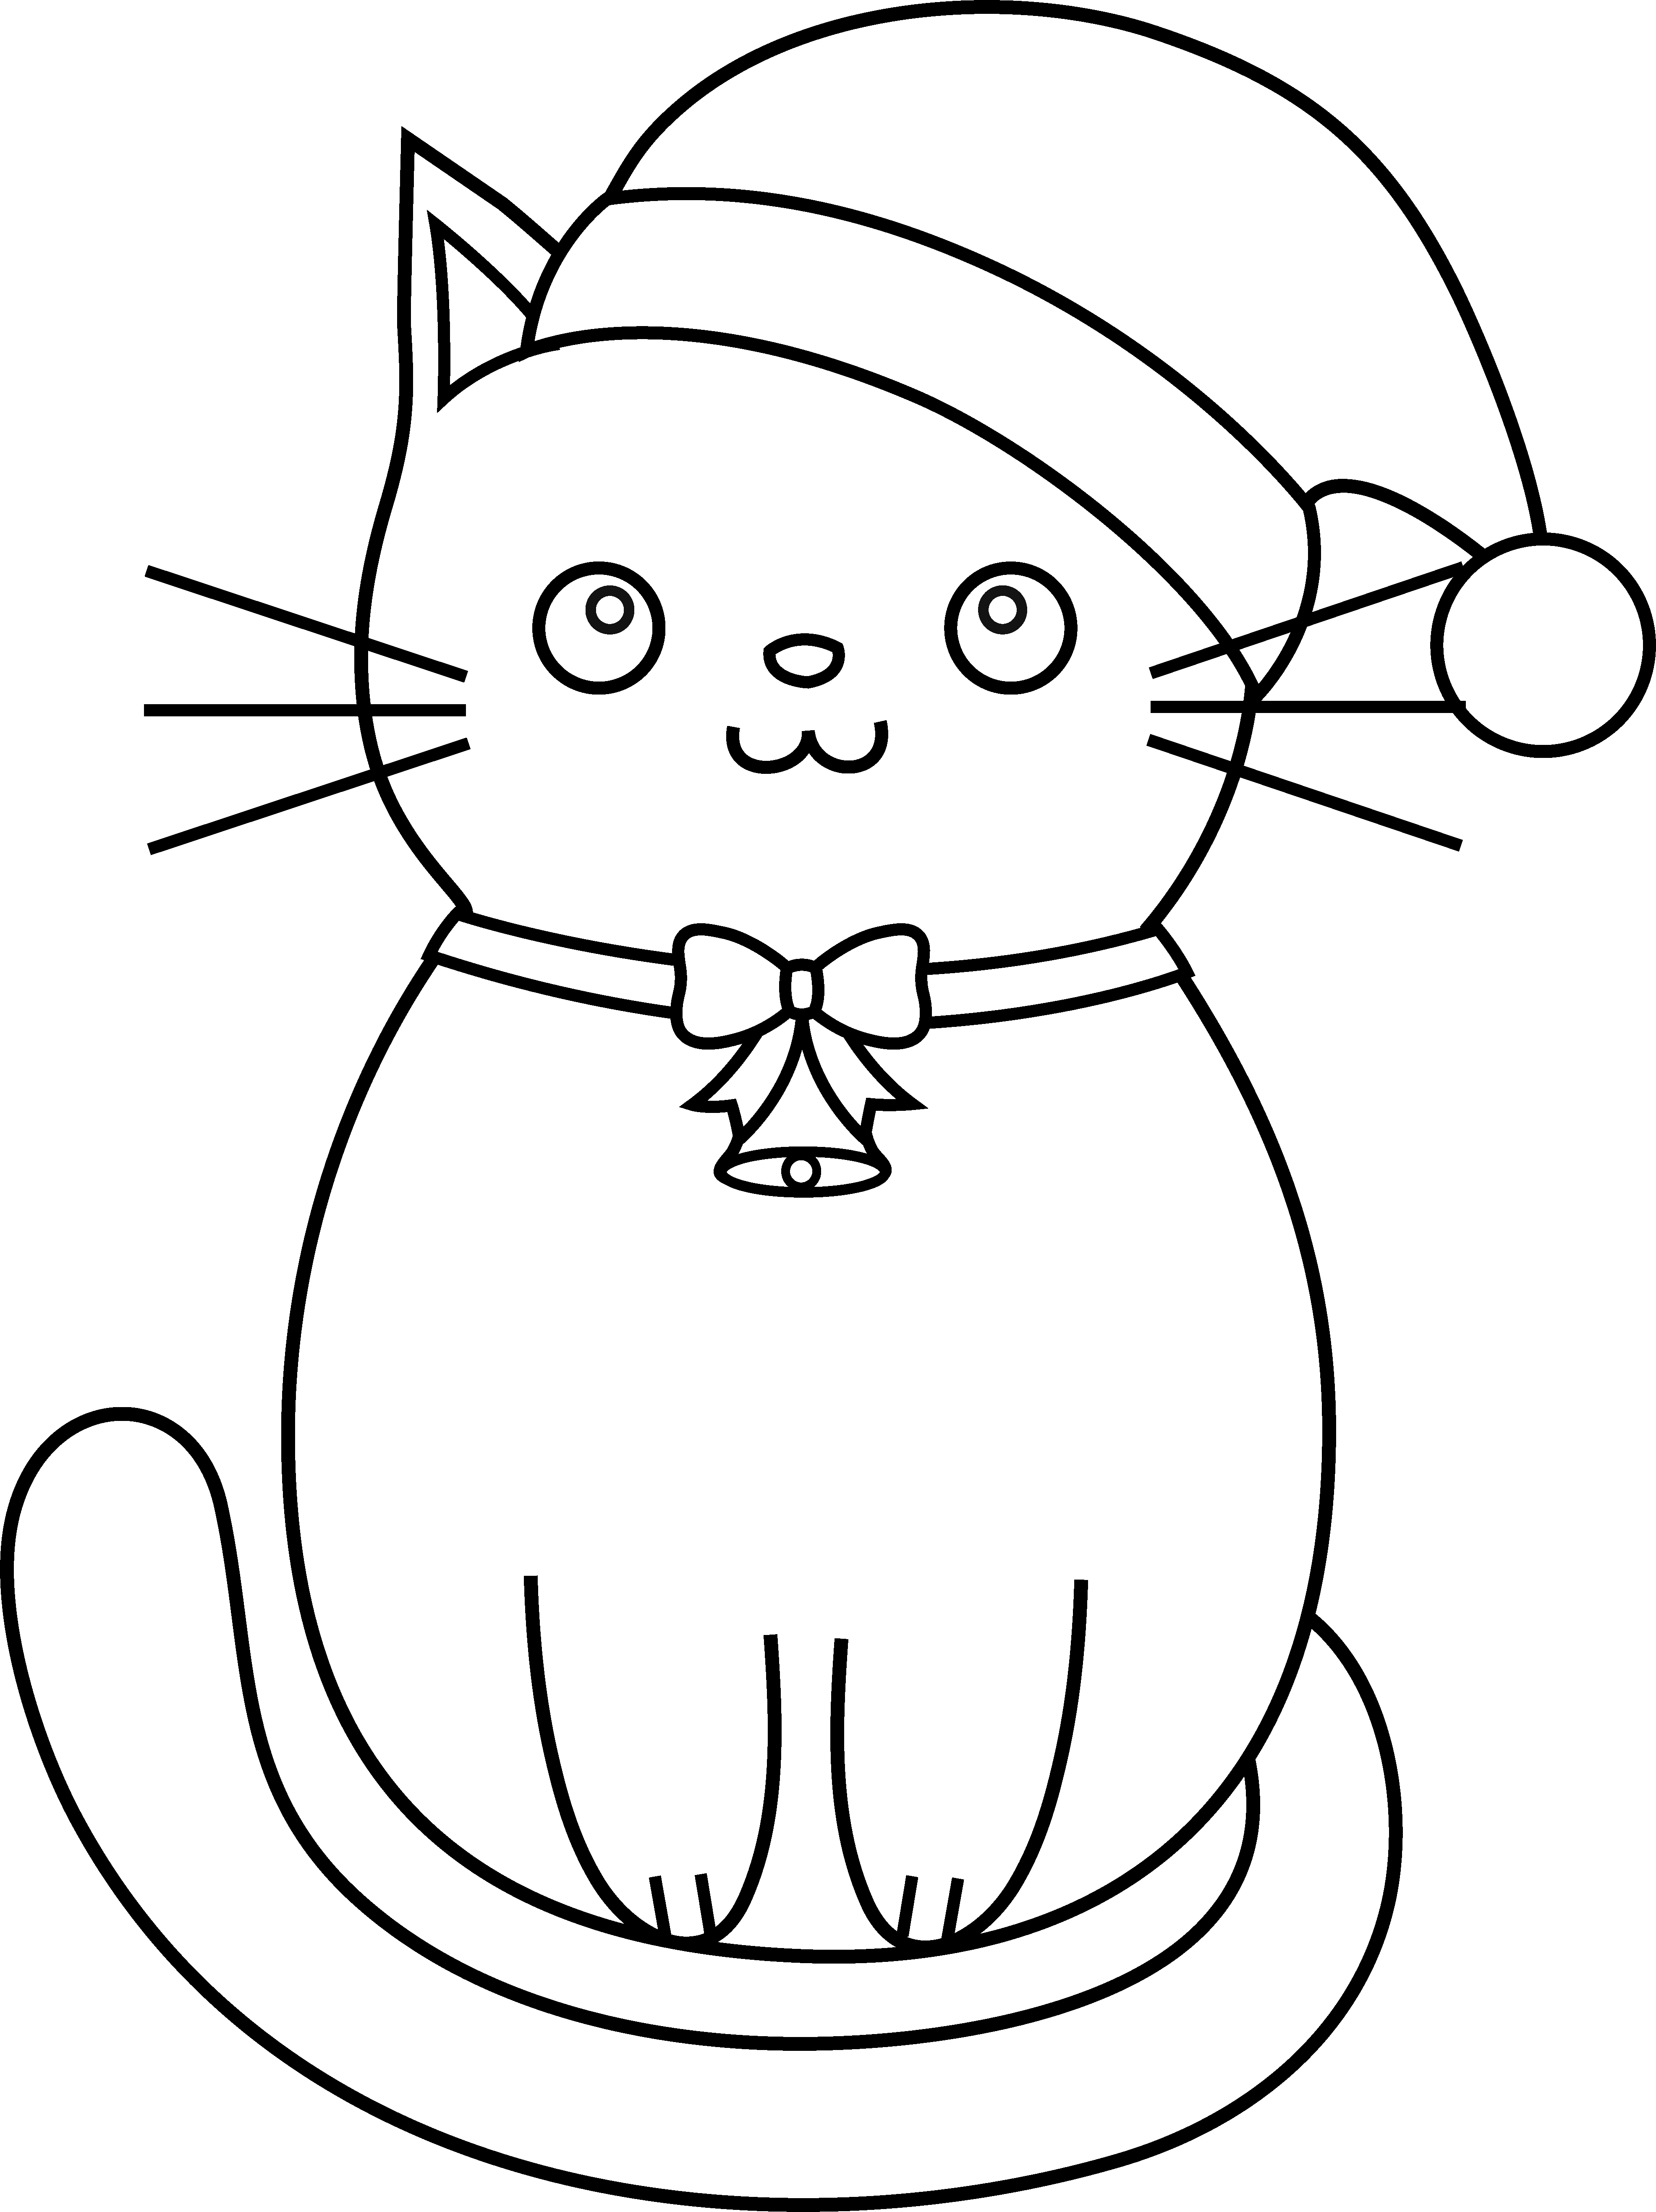 kitten-coloring-pages-best-coloring-pages-for-kids-printable-pictures